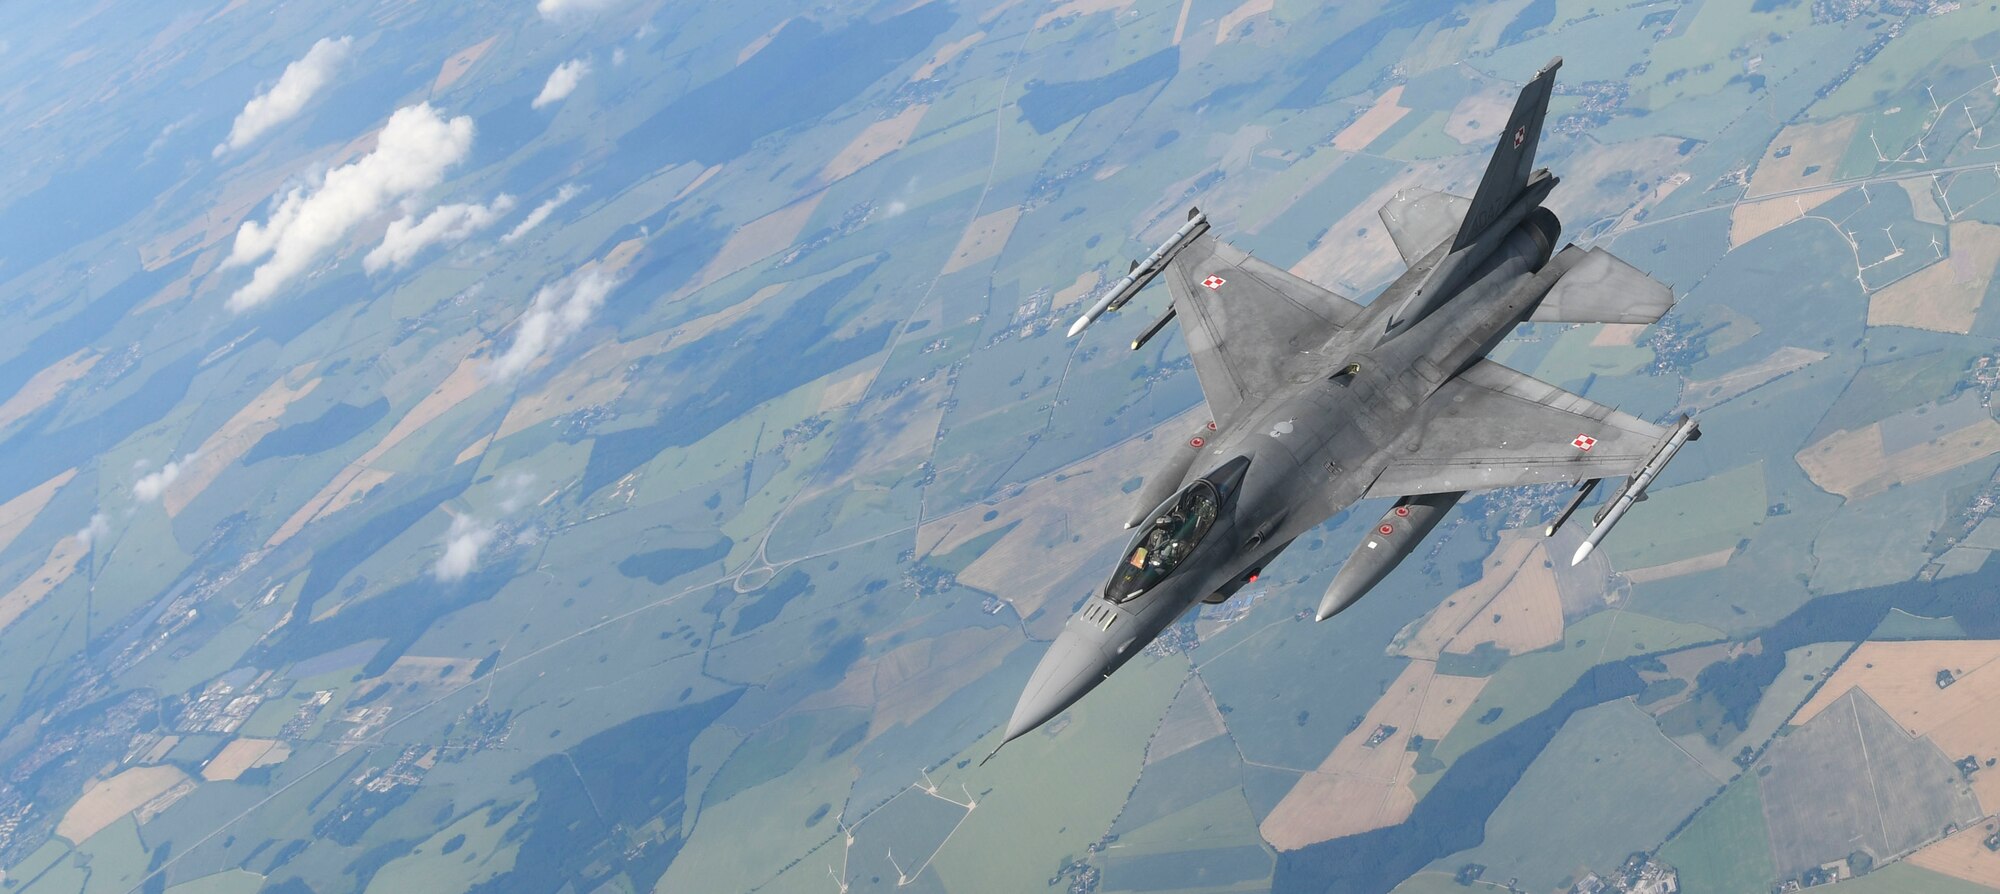 A Polish air force F-16 Fighting Falcon flies beside a U.S. Air Force KC-135 Stratotanker during aerial refueling in support of Exercise Baltic Operations over Germany, June 19, 2019. The BALTOPS Exercise is a U.S. exercise focused on joint interoperability in the Baltic Region, planned and executed this year by the U.S. and NATO. (U.S. Air Force photo by Senior Airman Alexandria Lee)